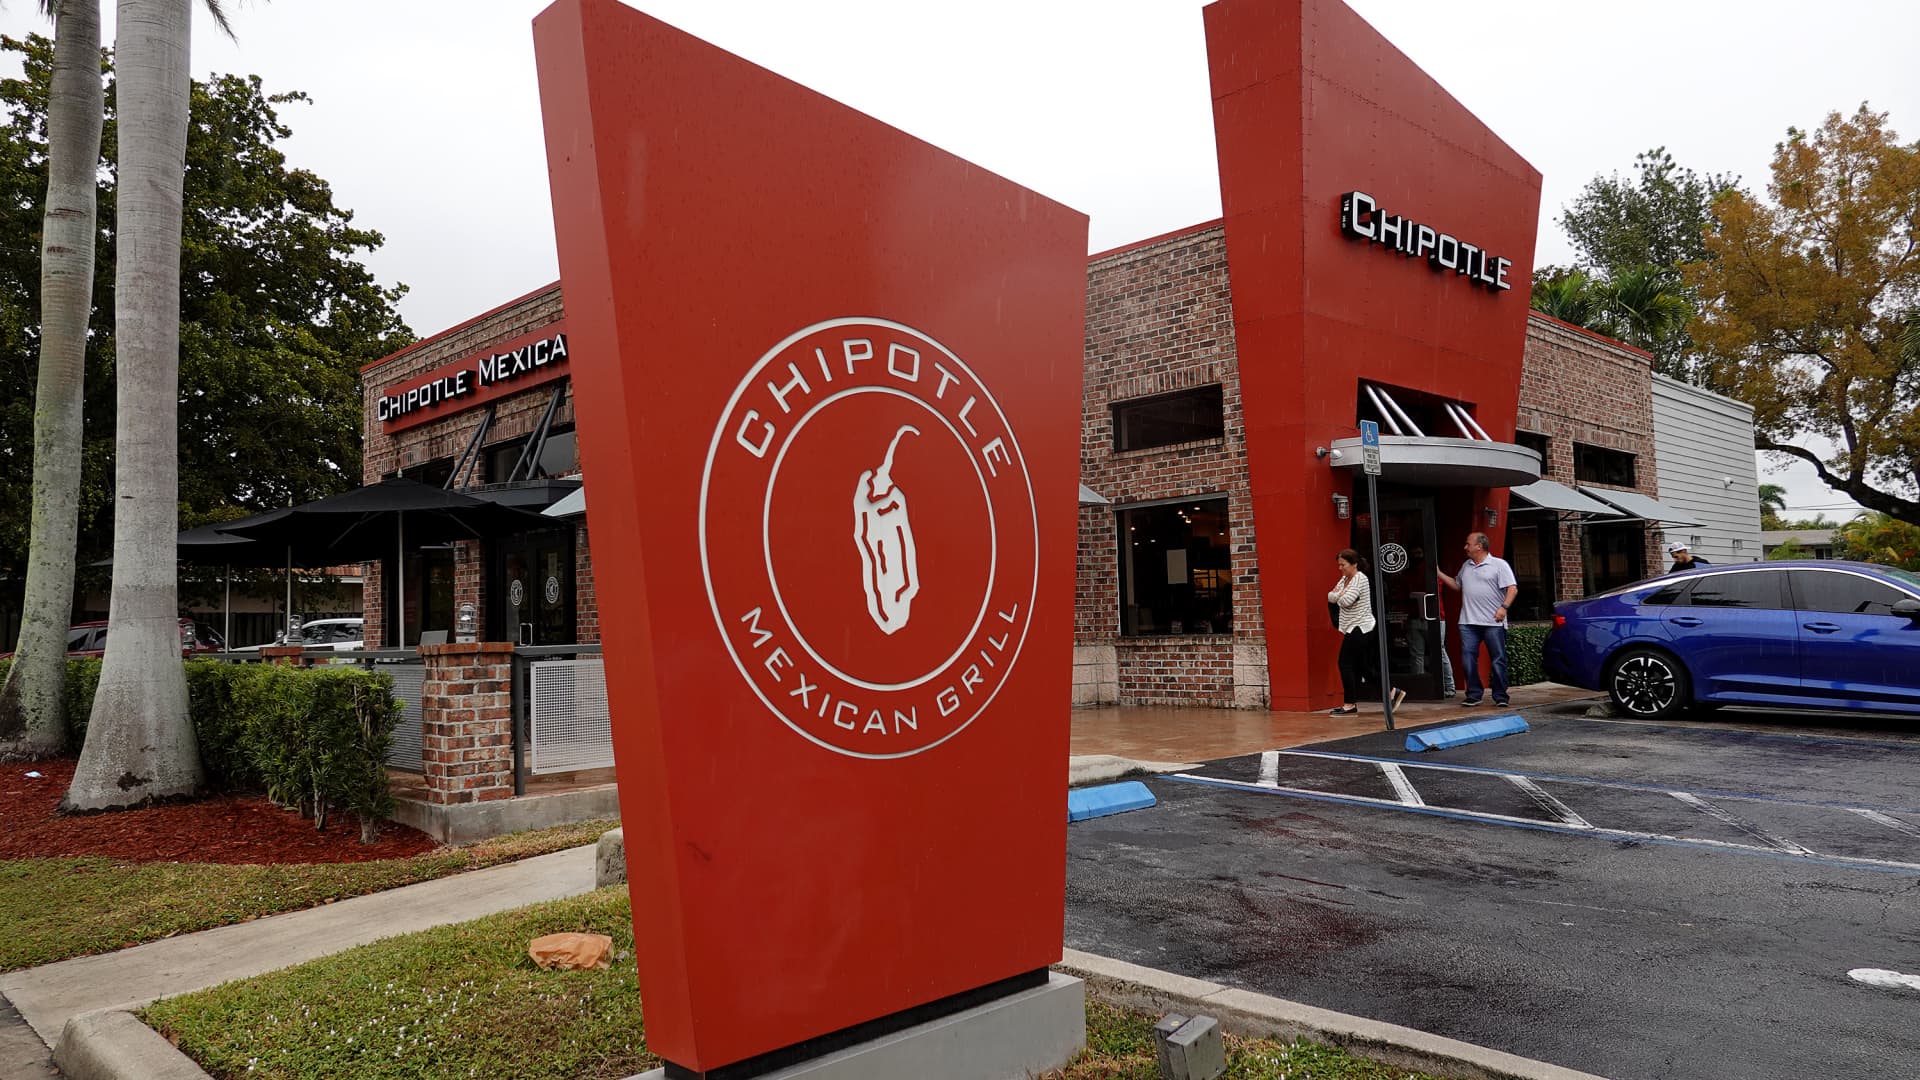 Chipotle Mexican Grill misses expectations for earnings, revenue and same-store sales